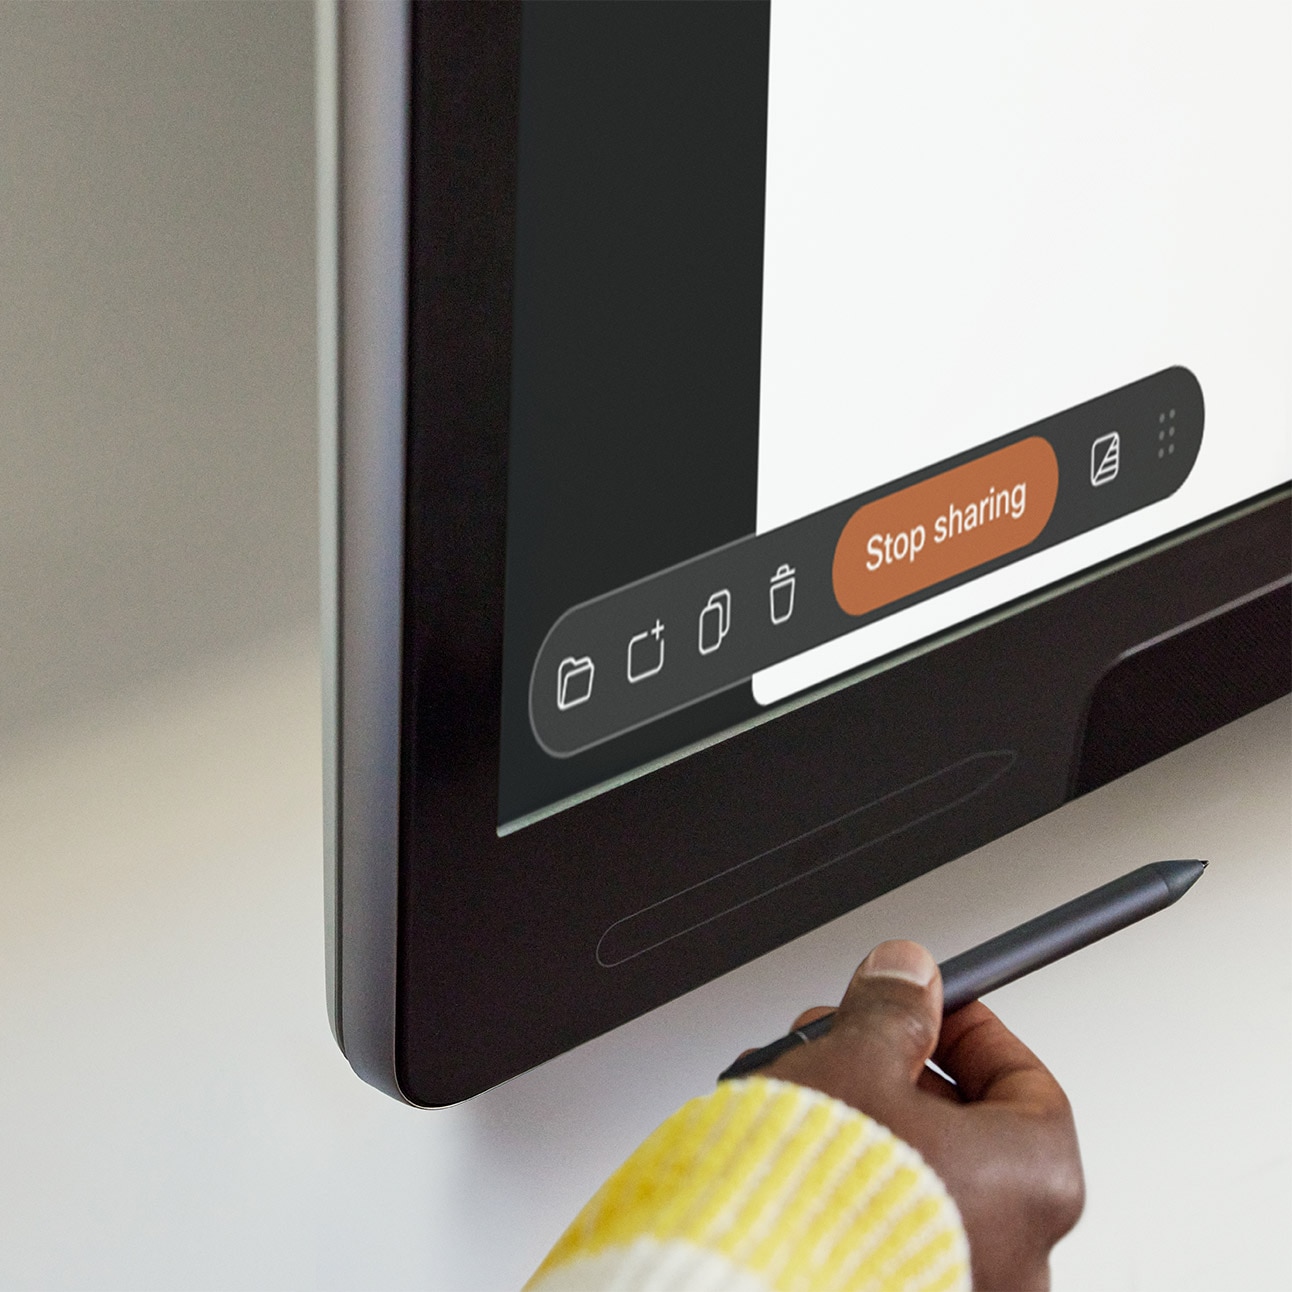 Close up of the bottom left corner of the wall-mounted Cisco Board Pro showing the magnetic board pen holder and the menu bar of the digital whiteboarding user interface. One person's hand is shows as she is about to attach the magnetic board stylus to the Board Pro.